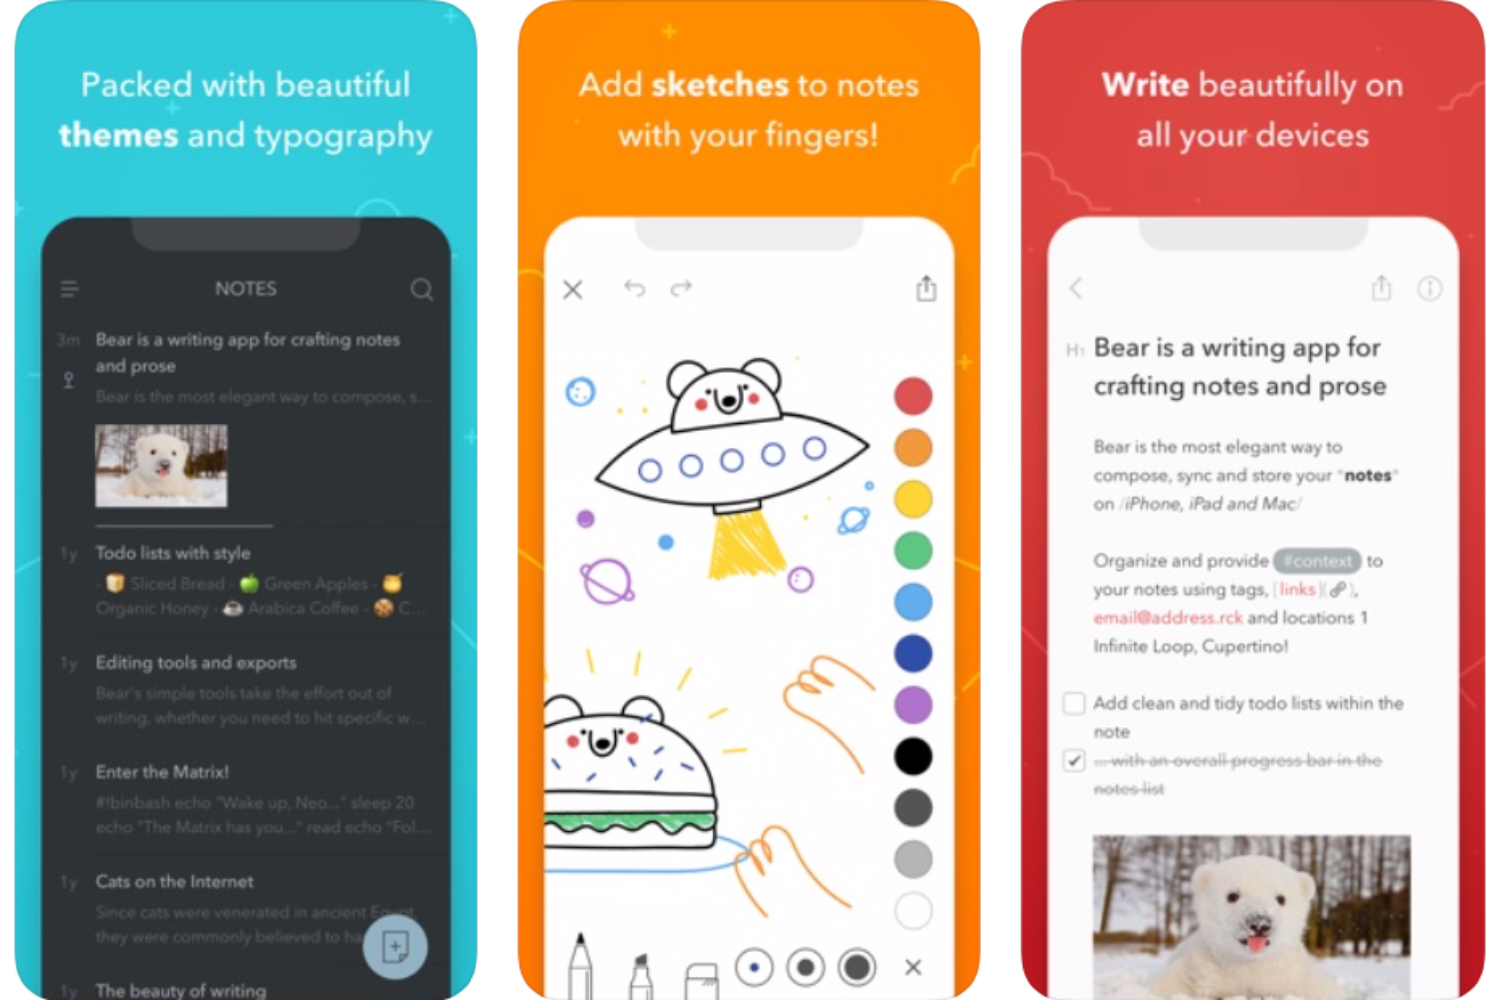 Compared: the Top 3 iPhone Apps for Taking Notes